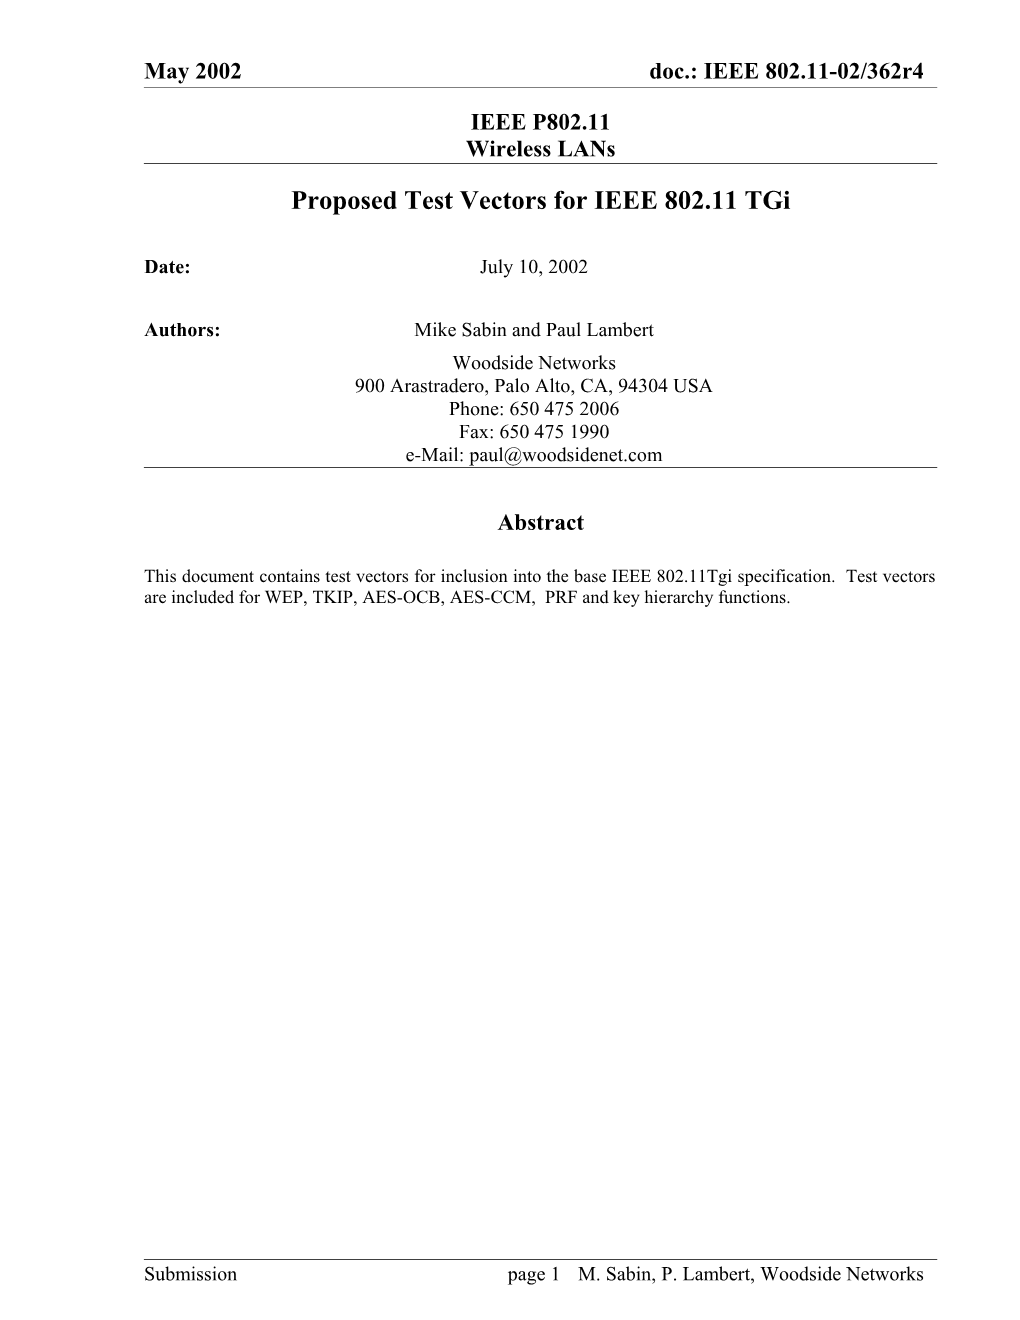 Proposed Test Vectors for IEEE 802.11 Tgi